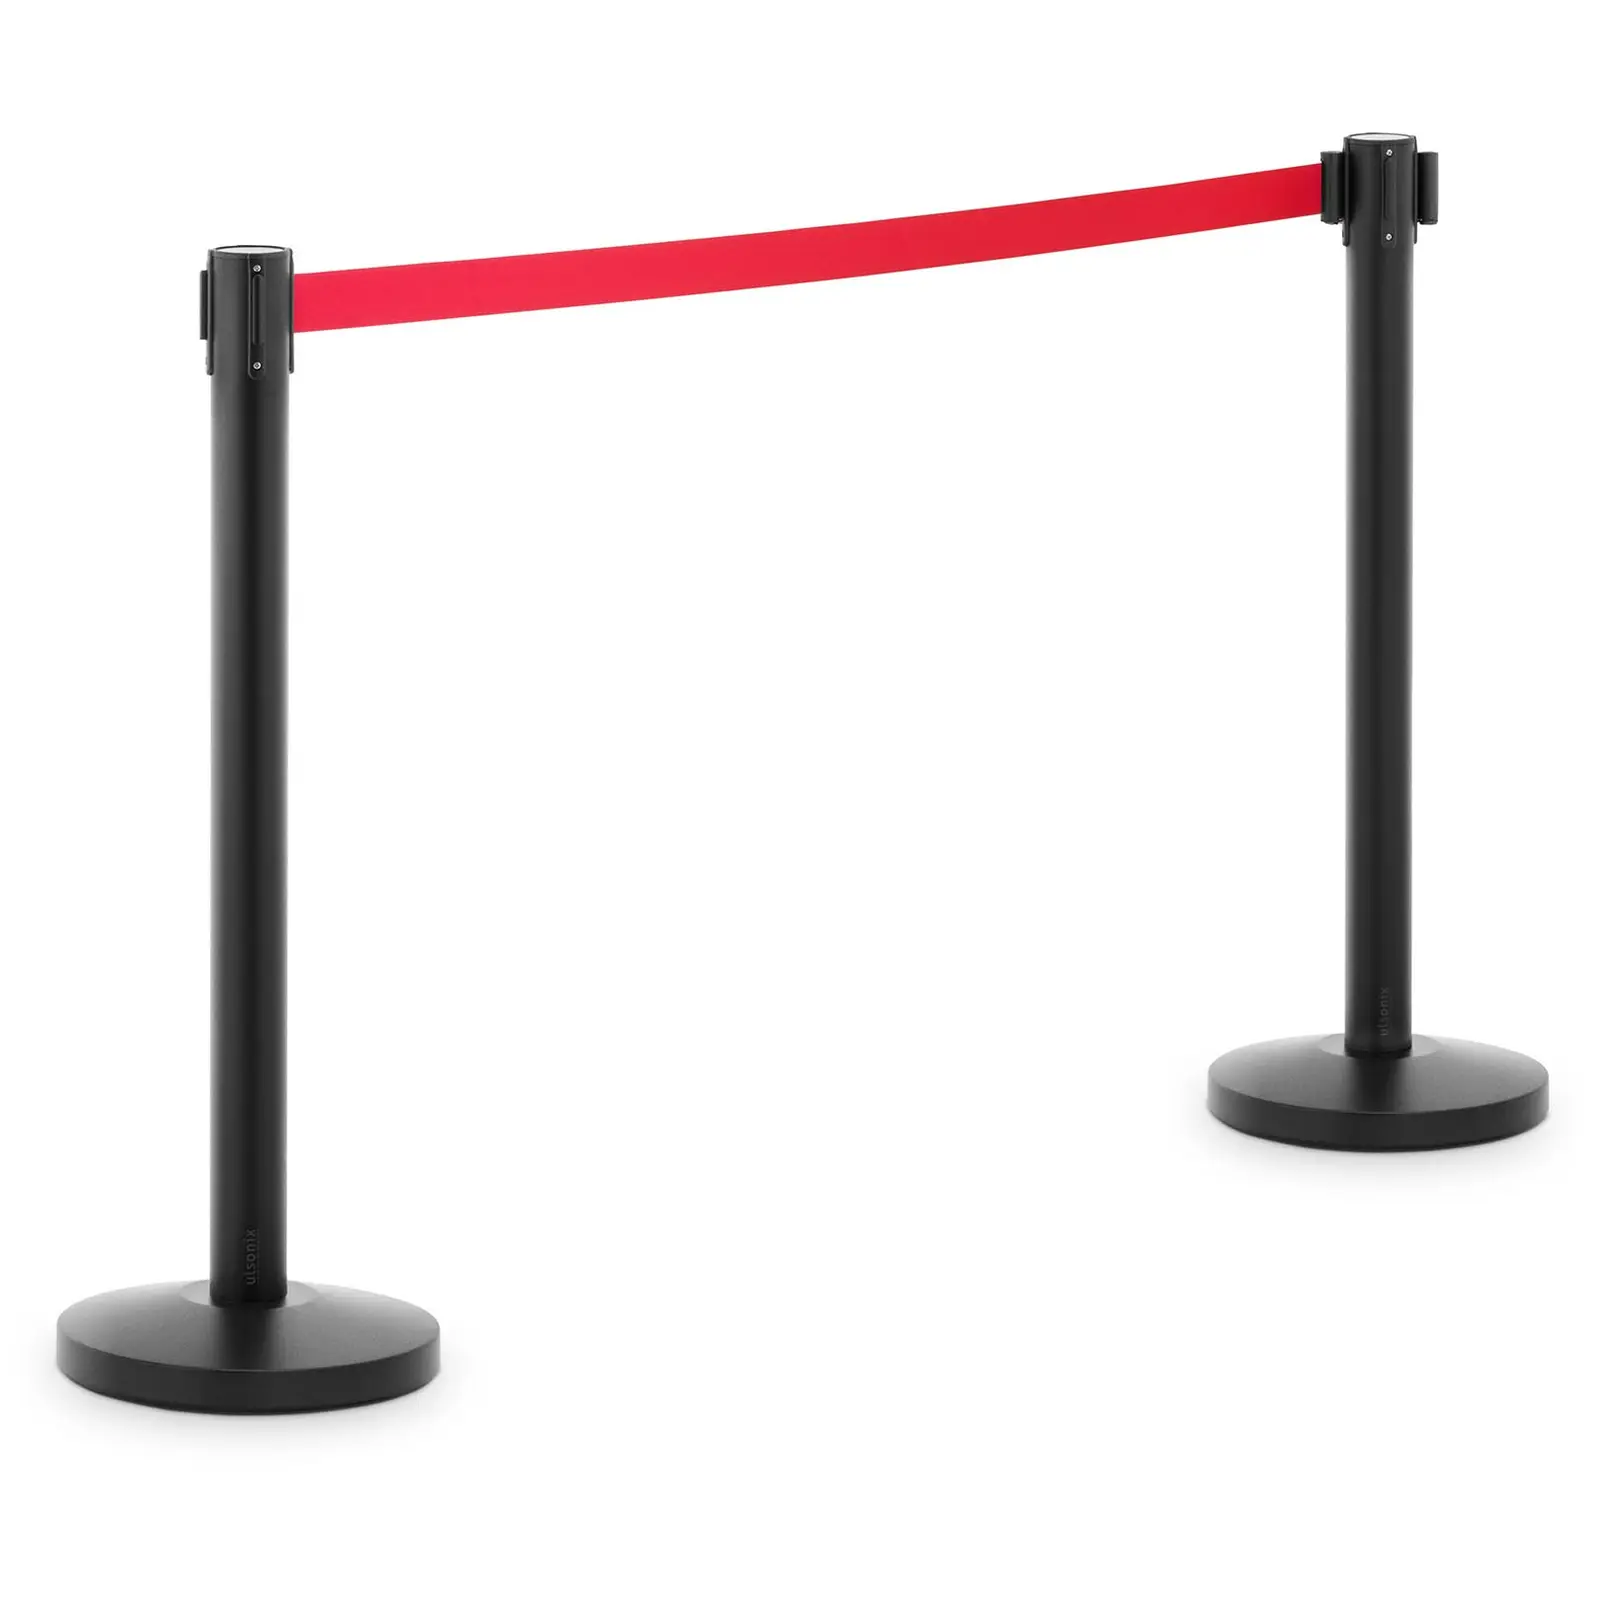 2 Barrier Posts - with strap - 200 cm - iron black coated